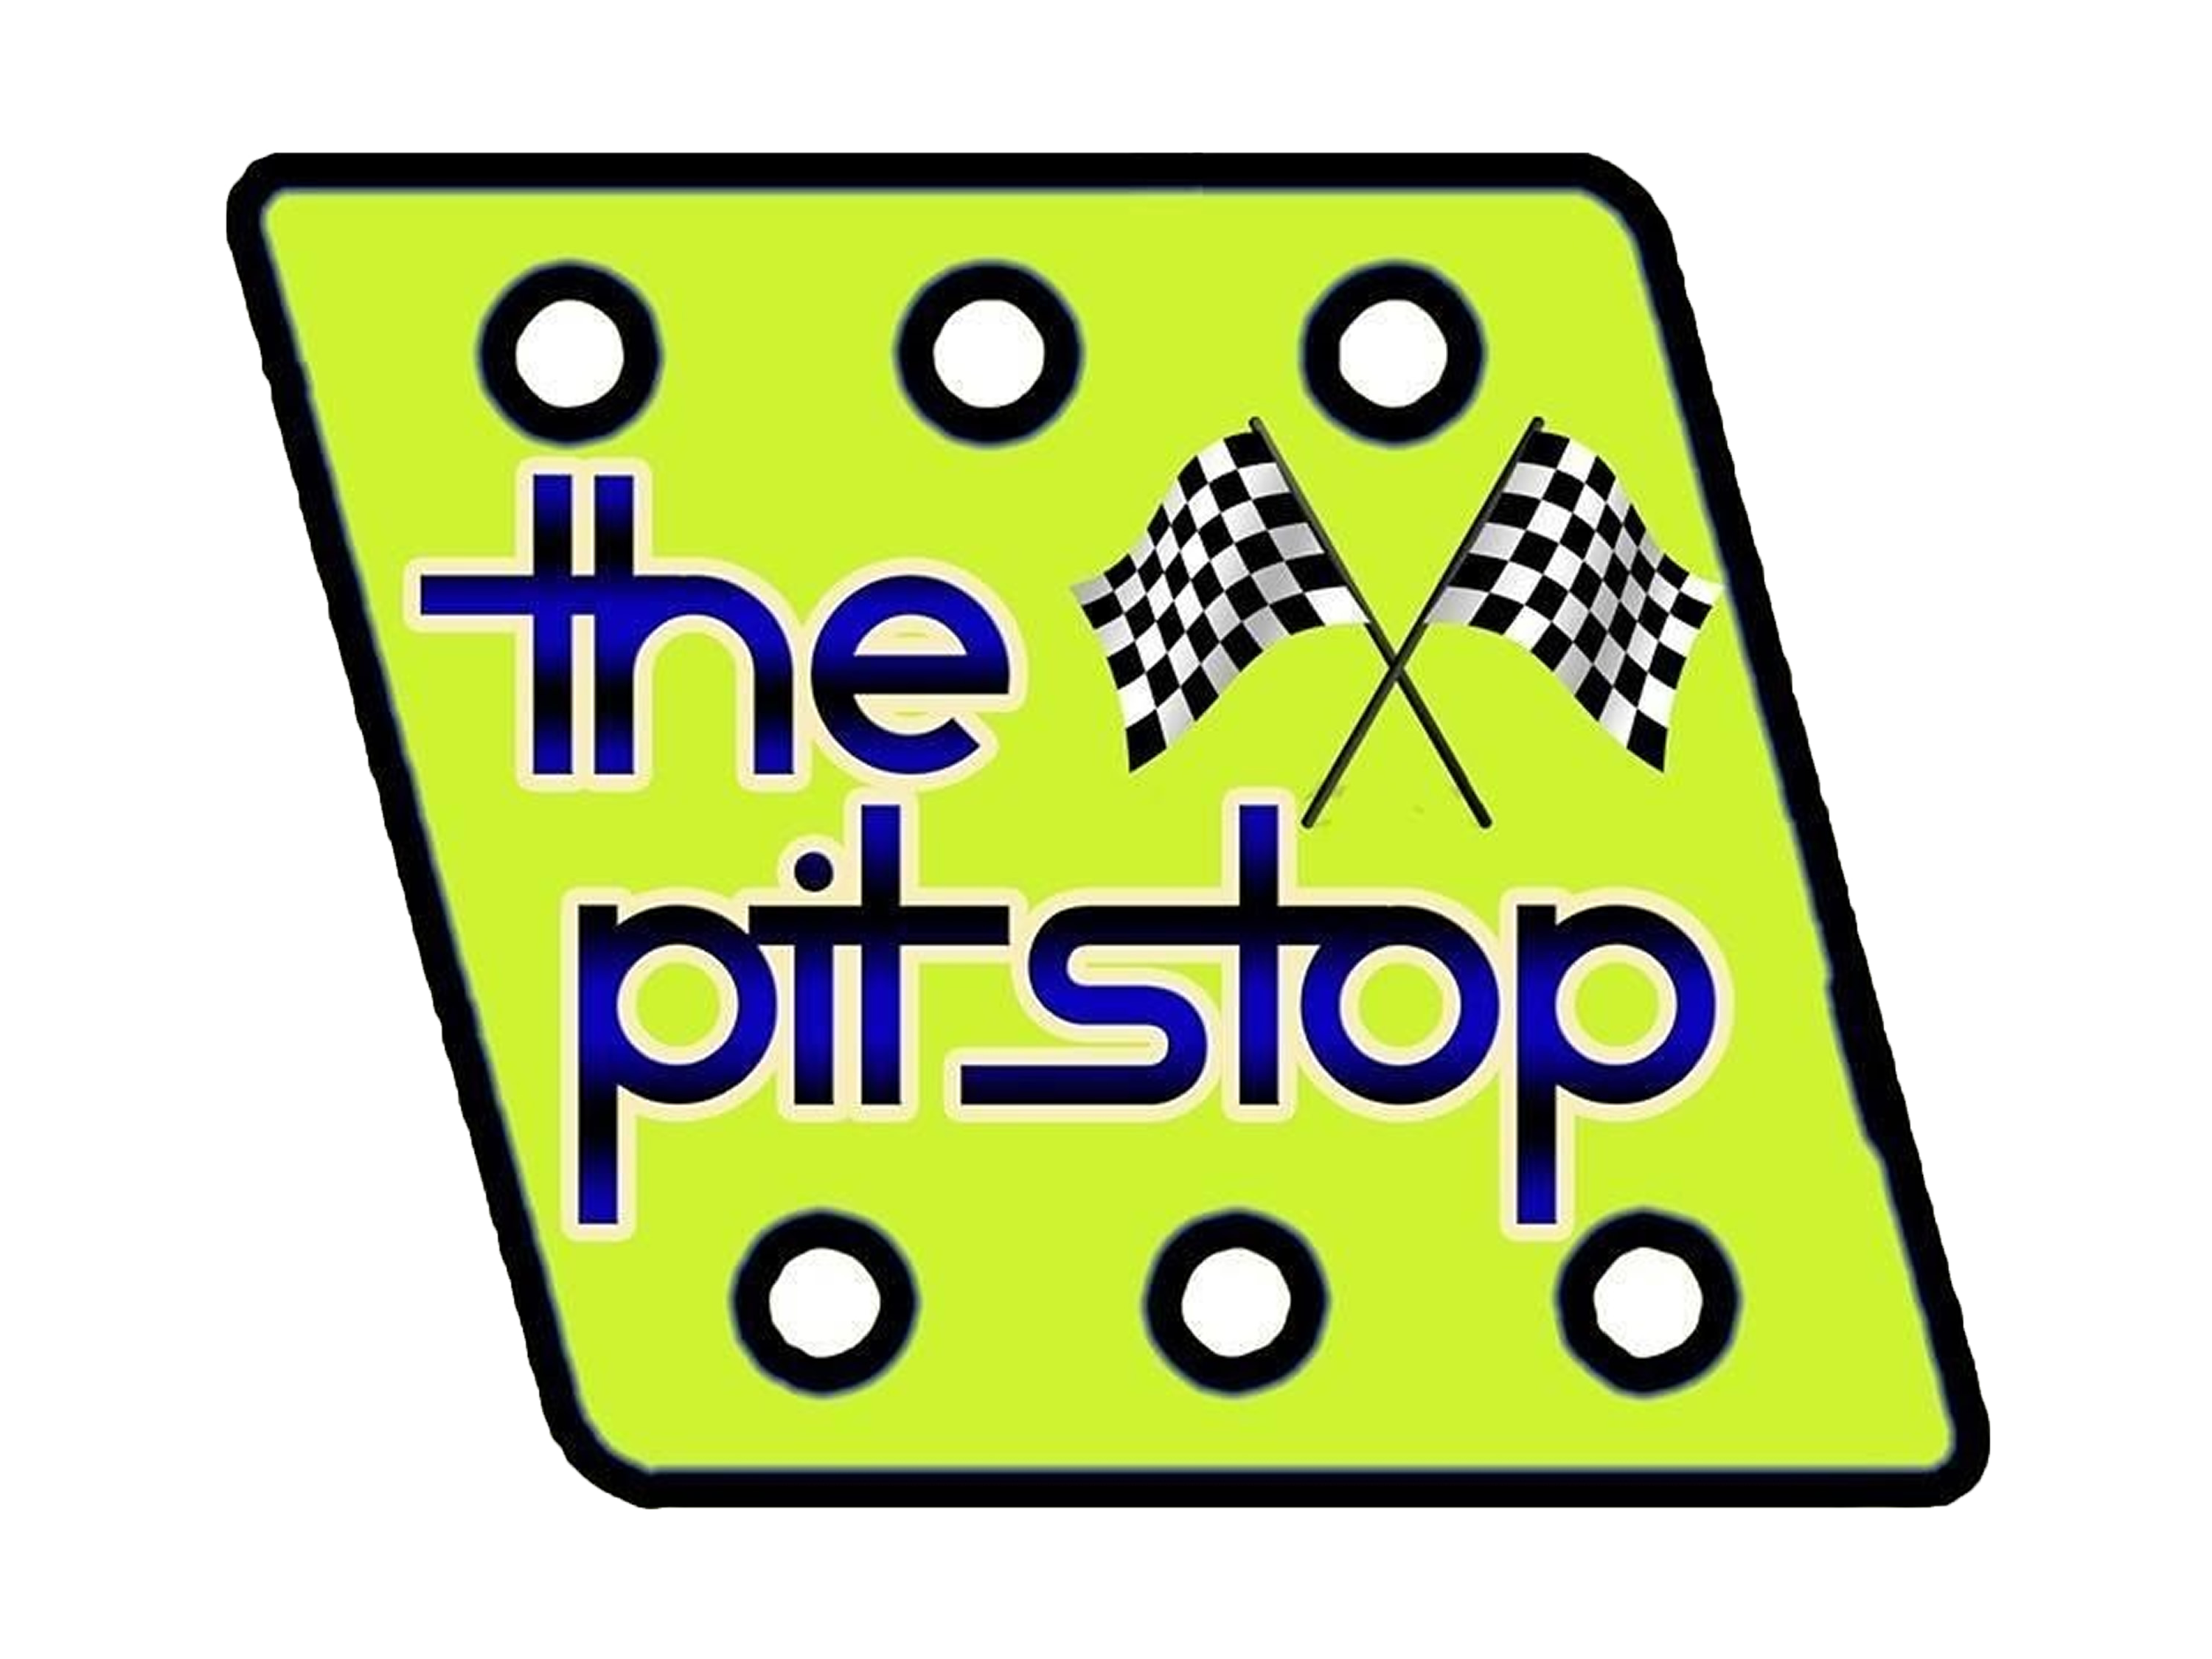 nascar clipart pitstop